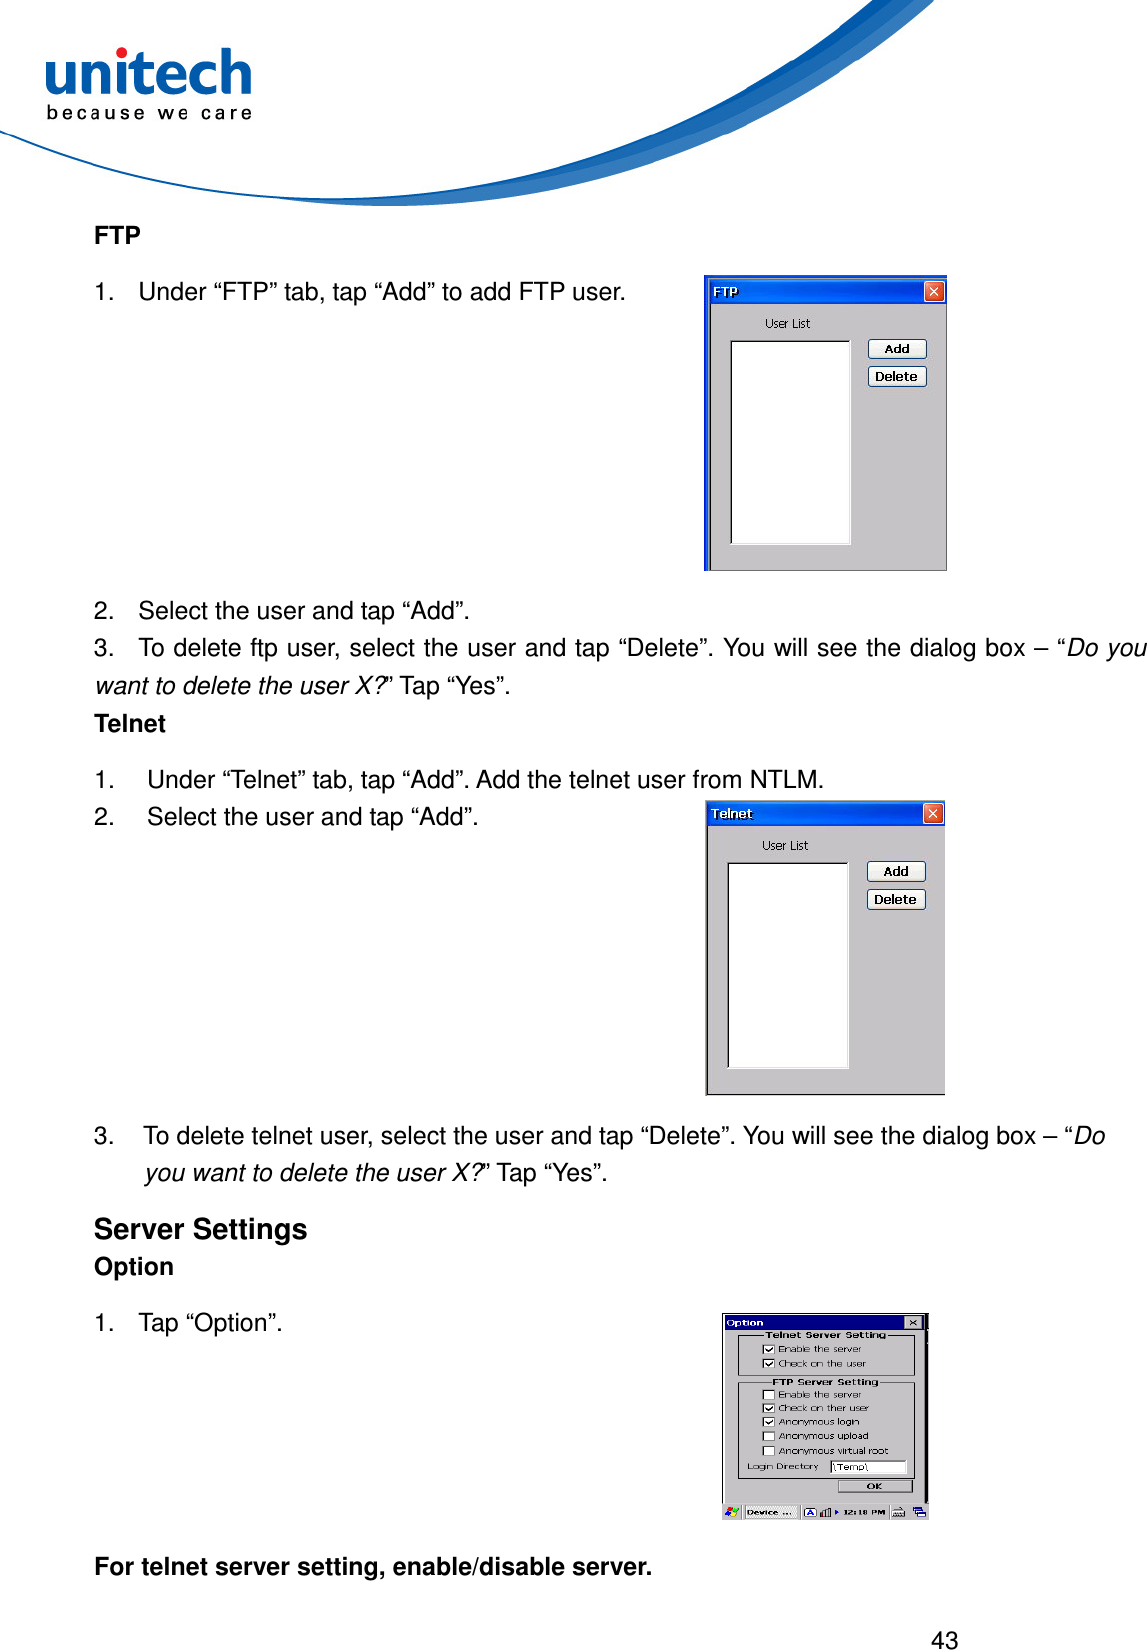  43  FTP 1.  Under “FTP” tab, tap “Add” to add FTP user.  2.  Select the user and tap “Add”. 3.  To delete ftp user, select the user and tap “Delete”. You will see the dialog box – “Do you want to delete the user X?” Tap “Yes”. Telnet 1.  Under “Telnet” tab, tap “Add”. Add the telnet user from NTLM. 2.  Select the user and tap “Add”.  3.  To delete telnet user, select the user and tap “Delete”. You will see the dialog box – “Do you want to delete the user X?” Tap “Yes”. Server Settings Option 1.  Tap “Option”.  For telnet server setting, enable/disable server. 